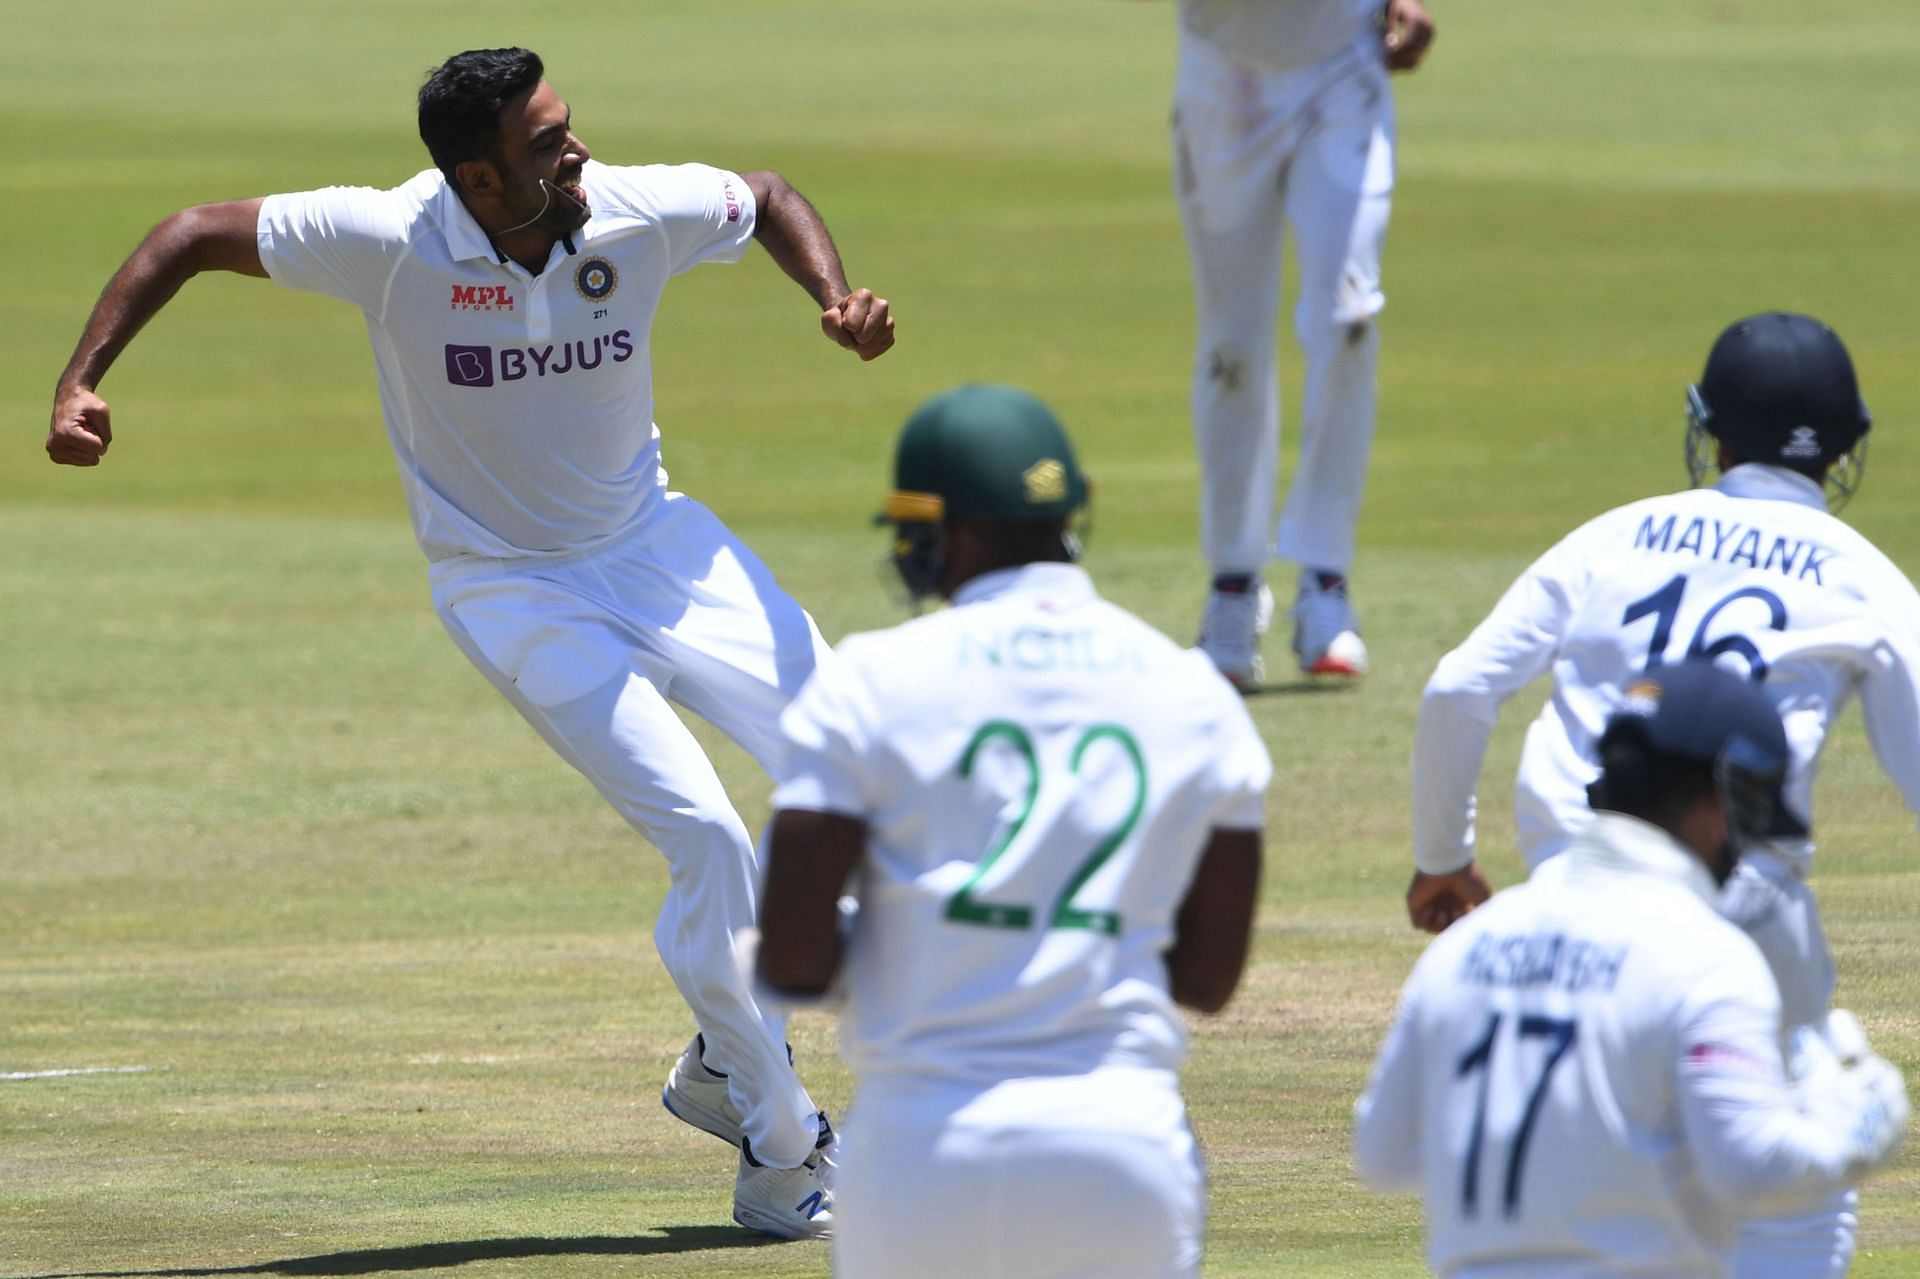 Ravichandran Ashwin (left) celebrates the wicket of Lungi Ngidi during the Centurion Test. Pic: Getty Images